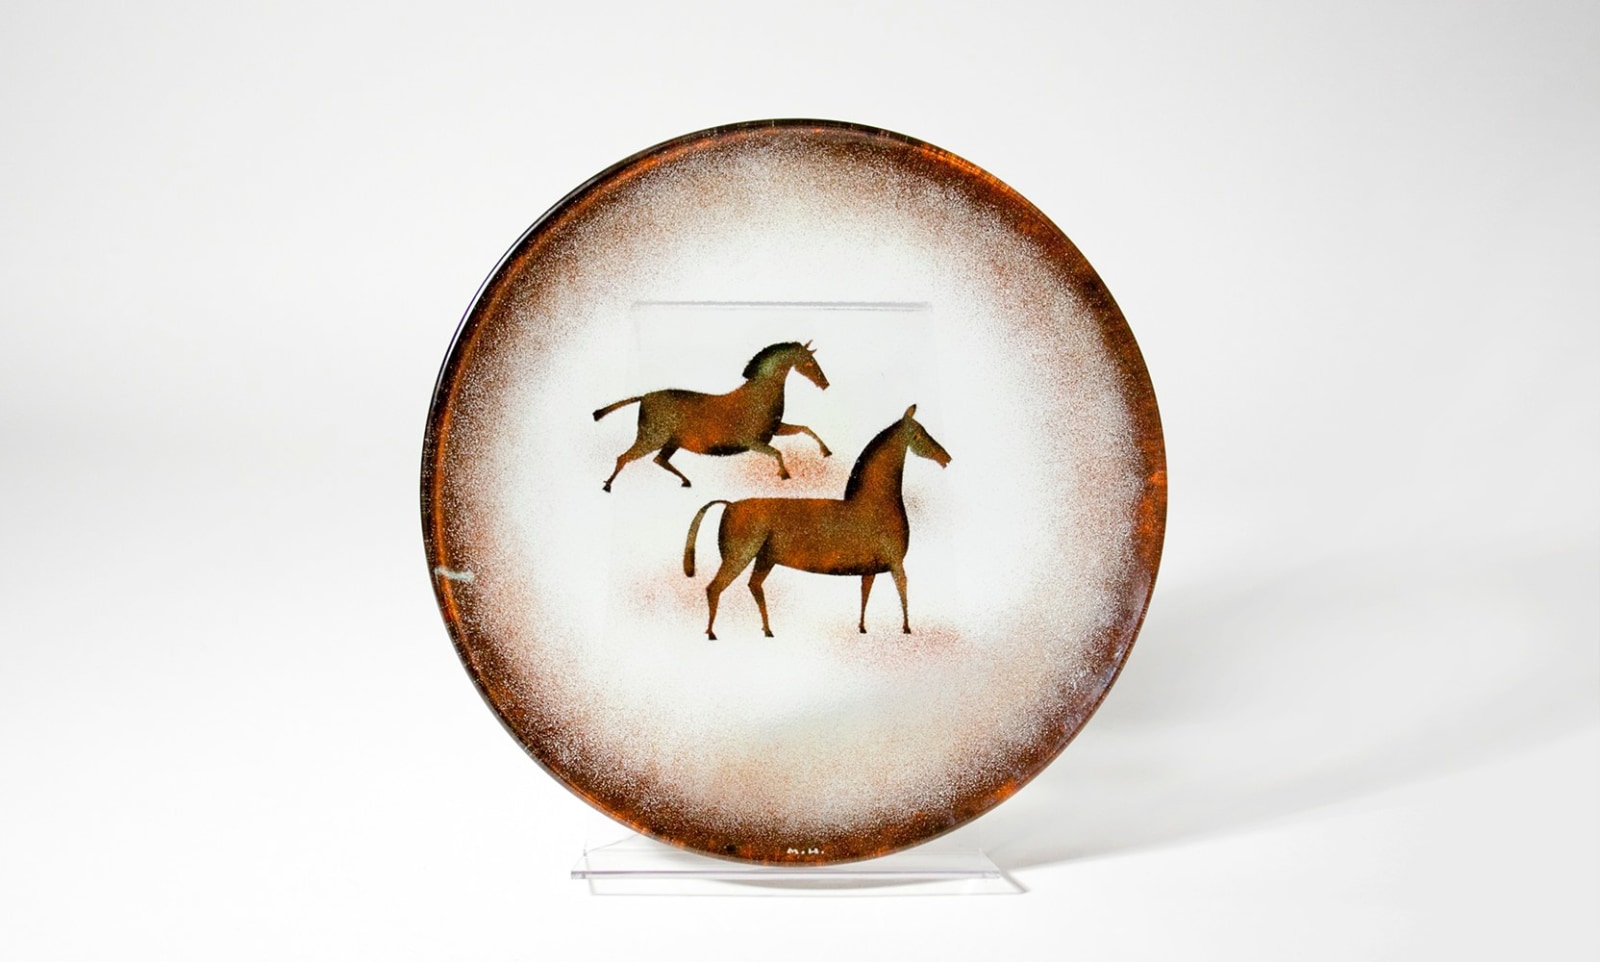 a shallow circular charger with mid-century stylized depiction of two brown horses, one galloping and one standing, by artist maurice heaton in his trademark technique using powdered enamel